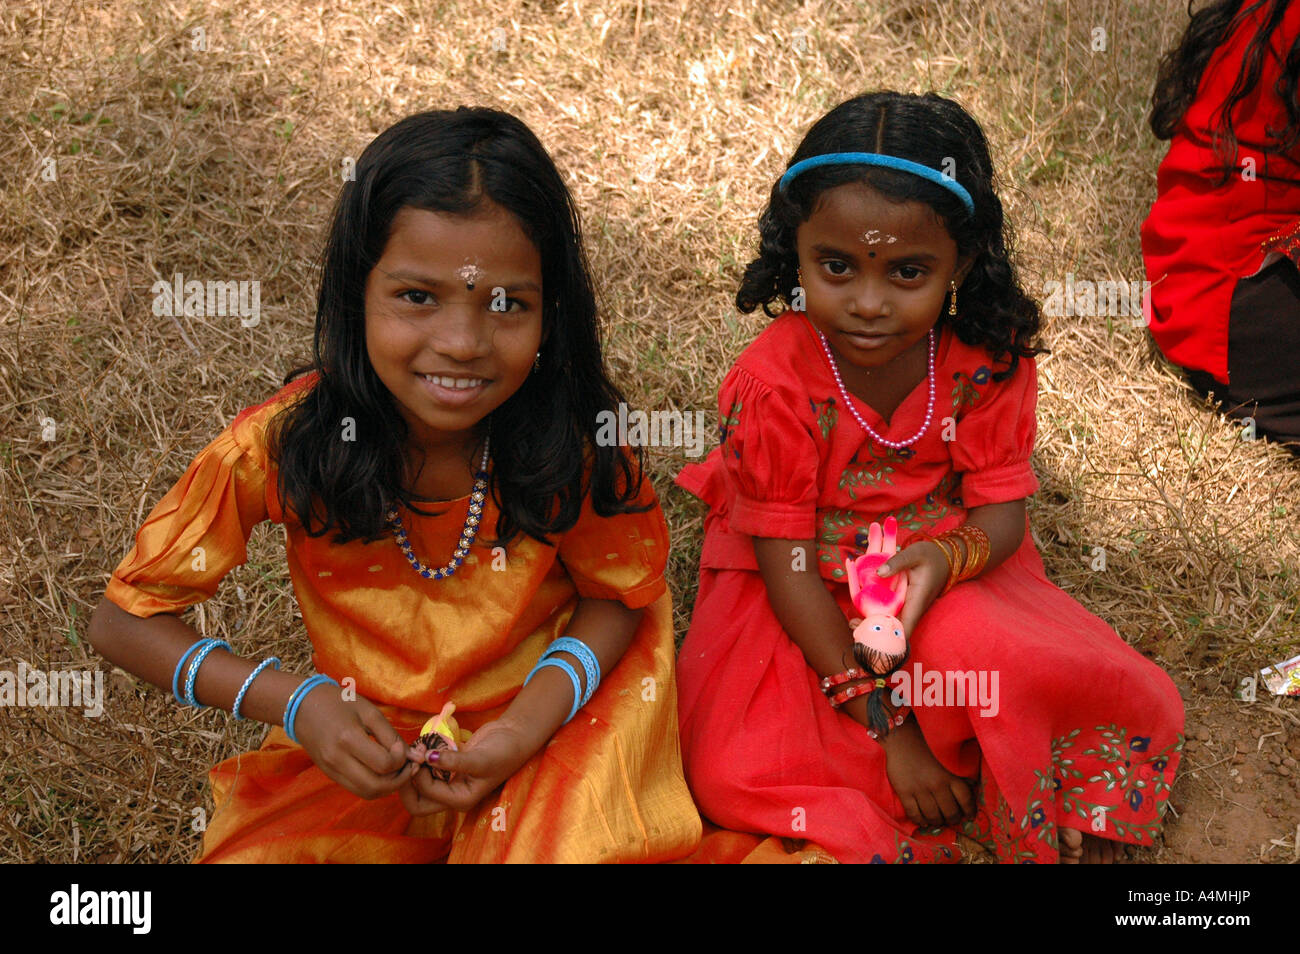 Two Indian girls at religous event in Kerala India Stock Photo - Alamy